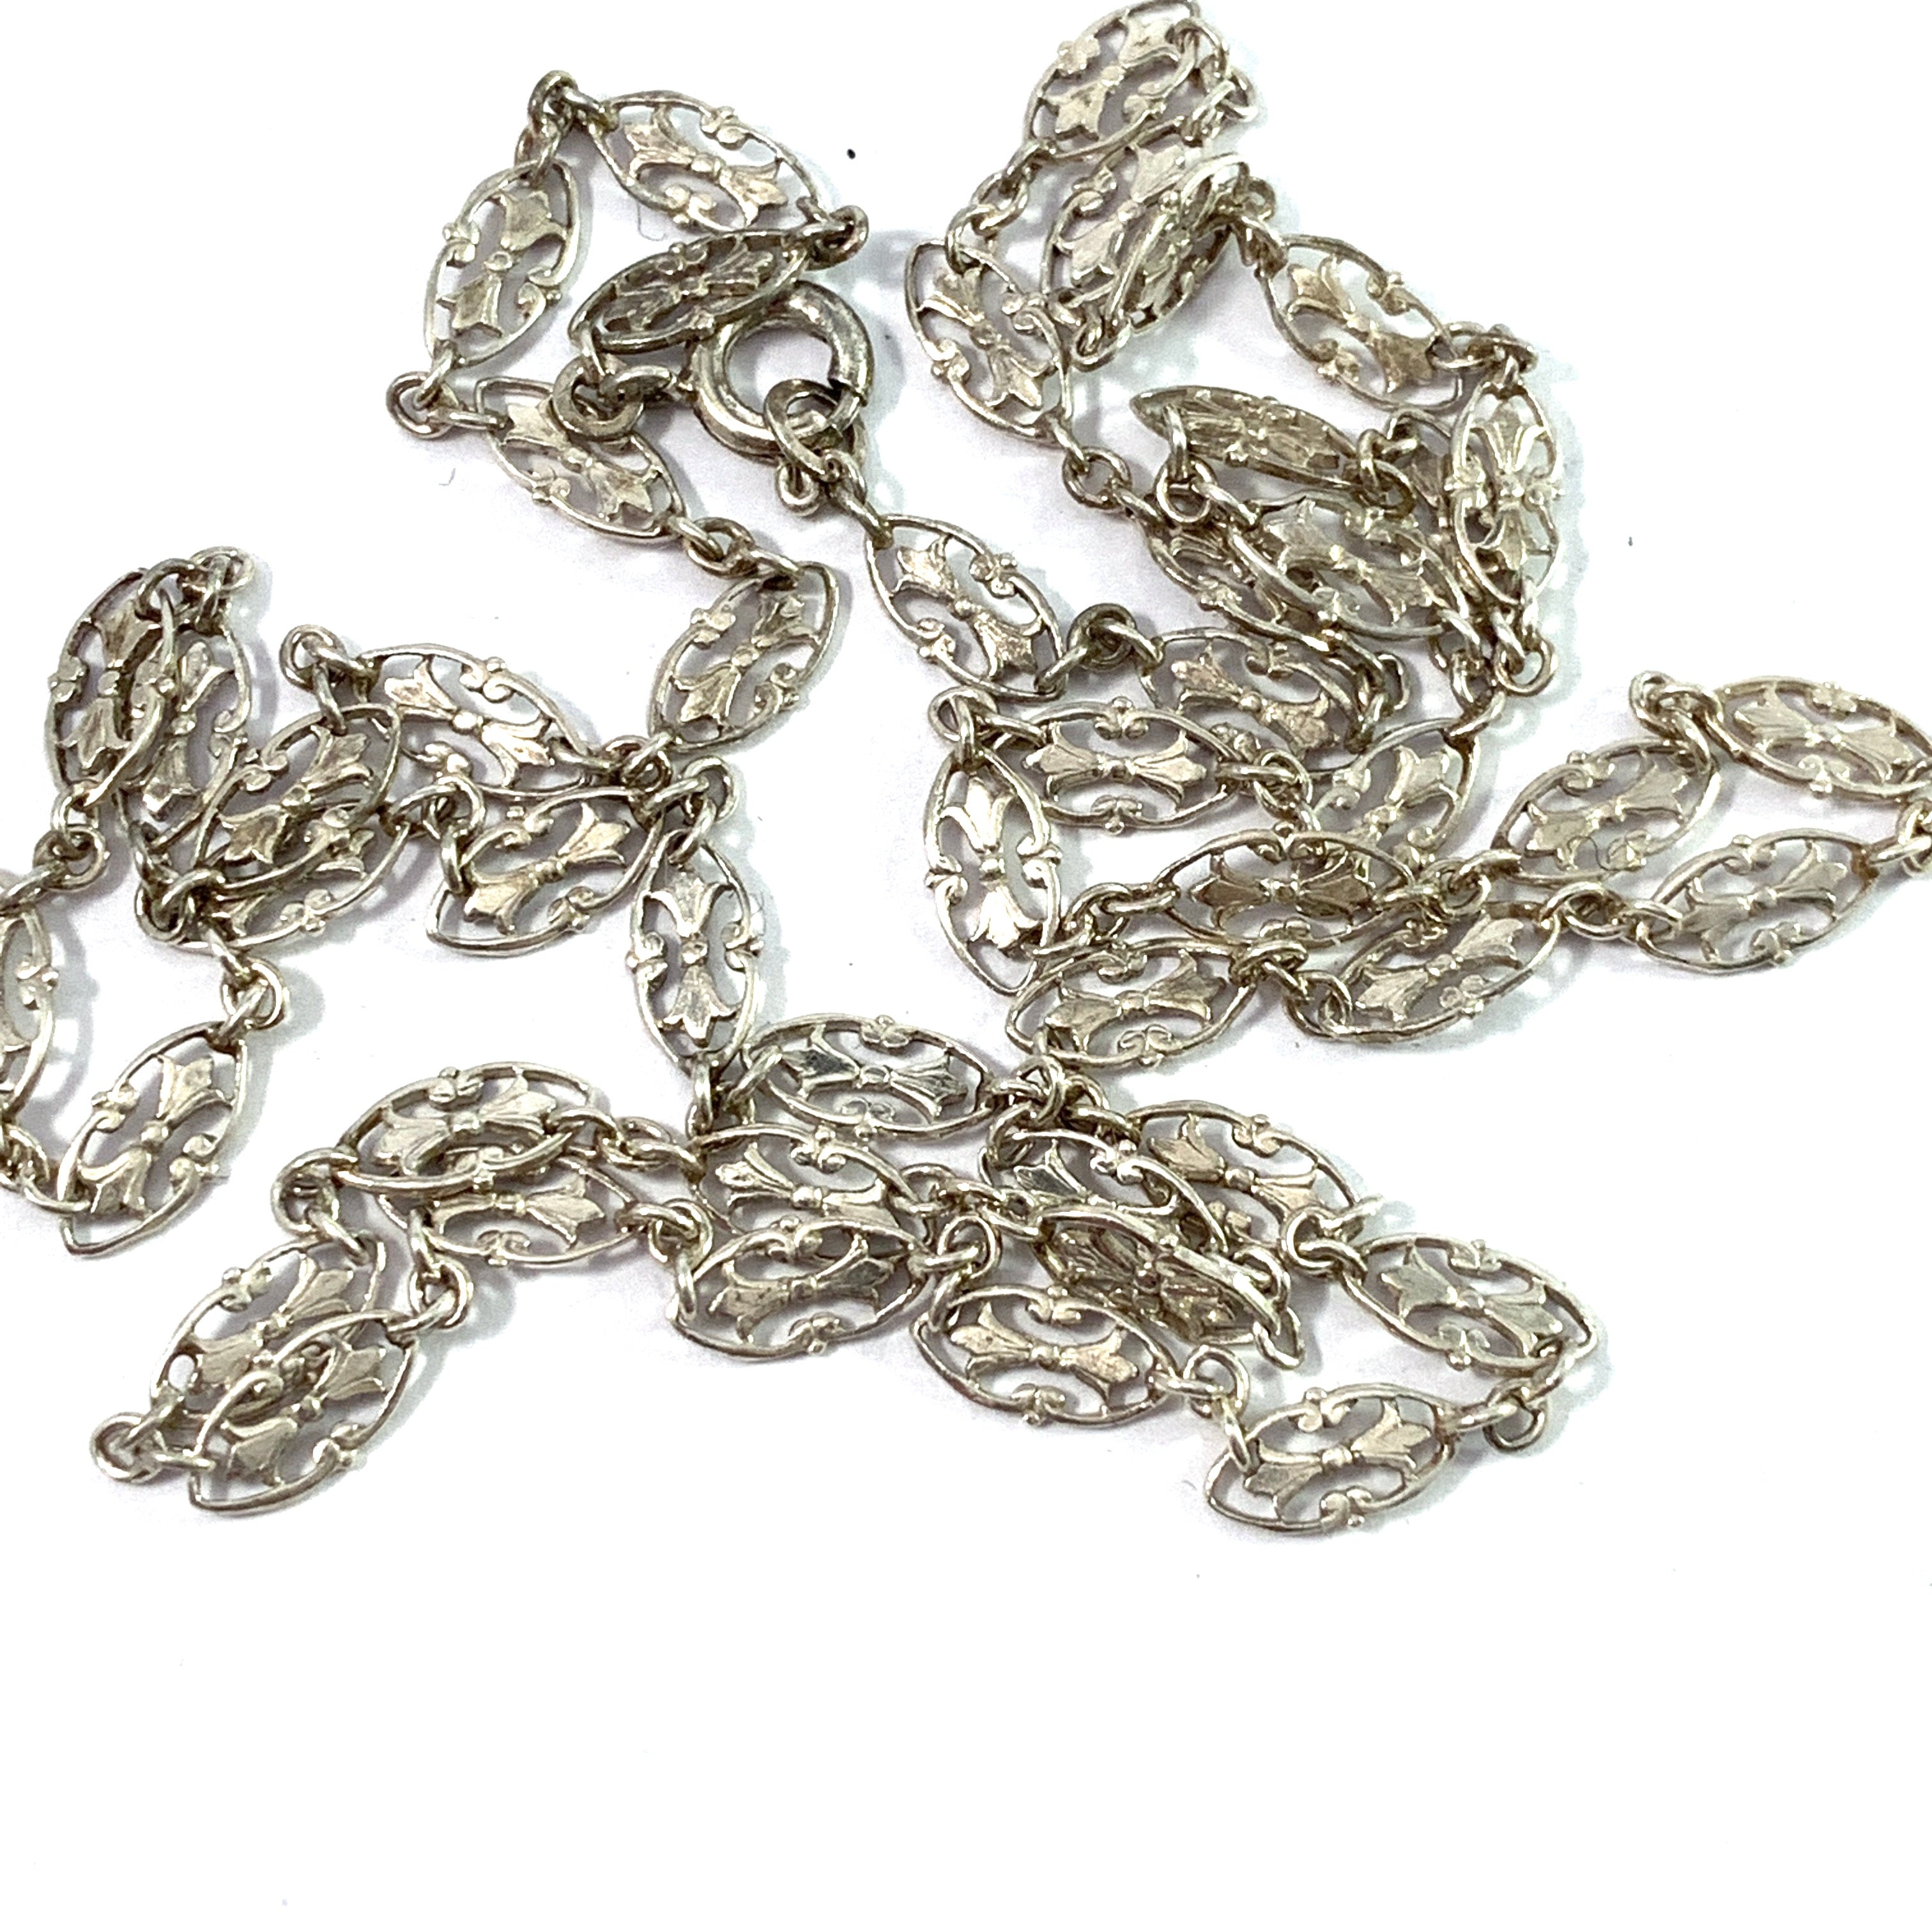 Delicate Antique c year 1900. Solid Silver French Lily Link Necklace.